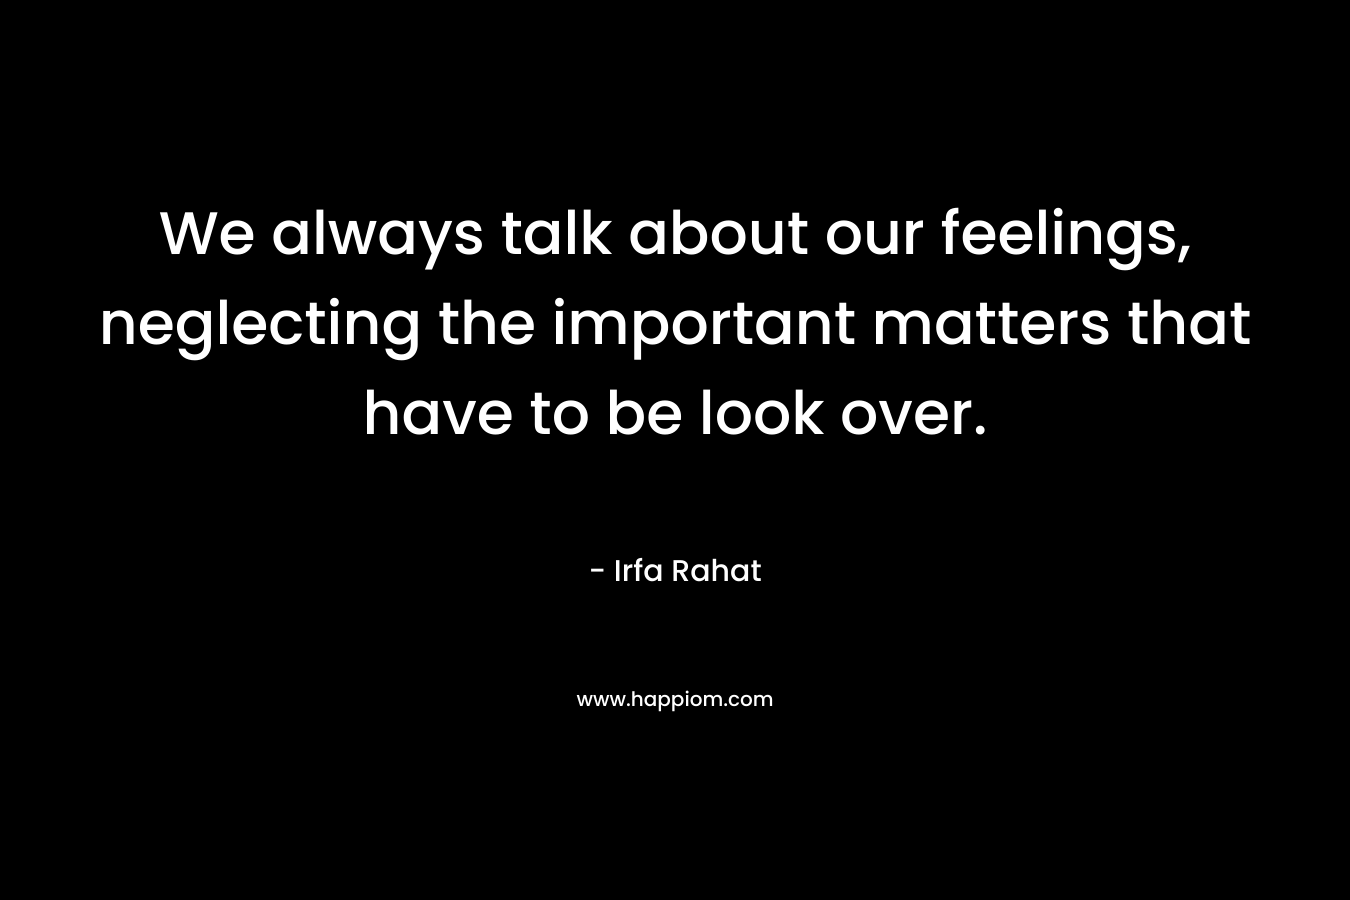 We always talk about our feelings, neglecting the important matters that have to be look over. – Irfa Rahat